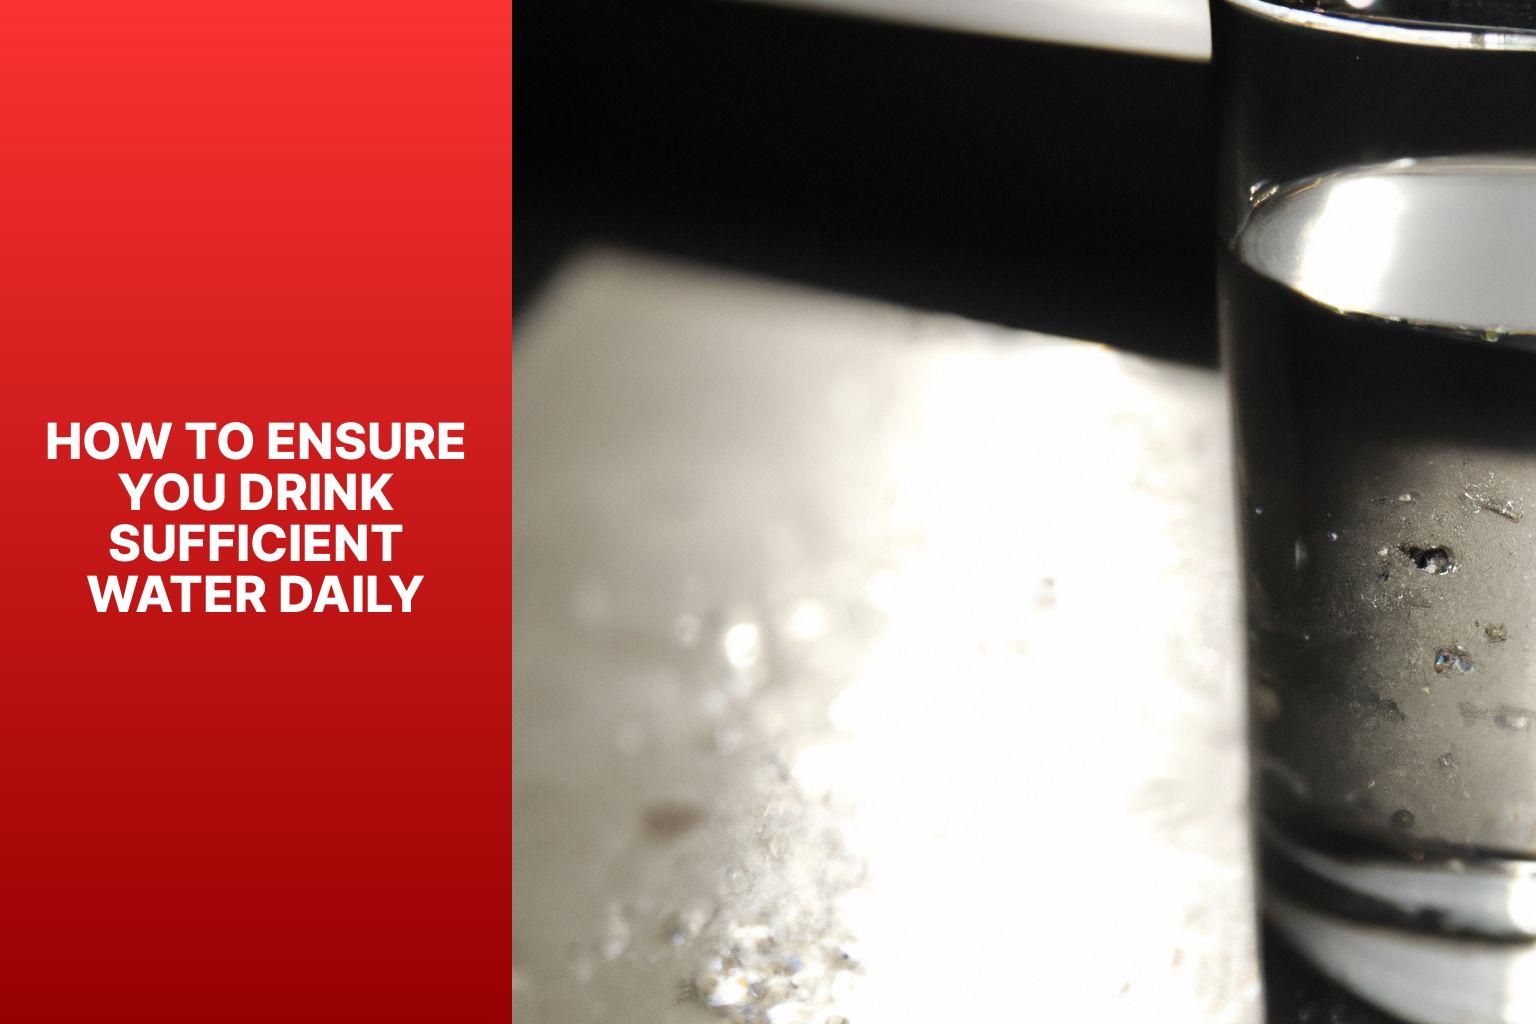 How to Ensure You Drink Sufficient Water Daily - The Benefits of Drinking Sufficient Water Daily 